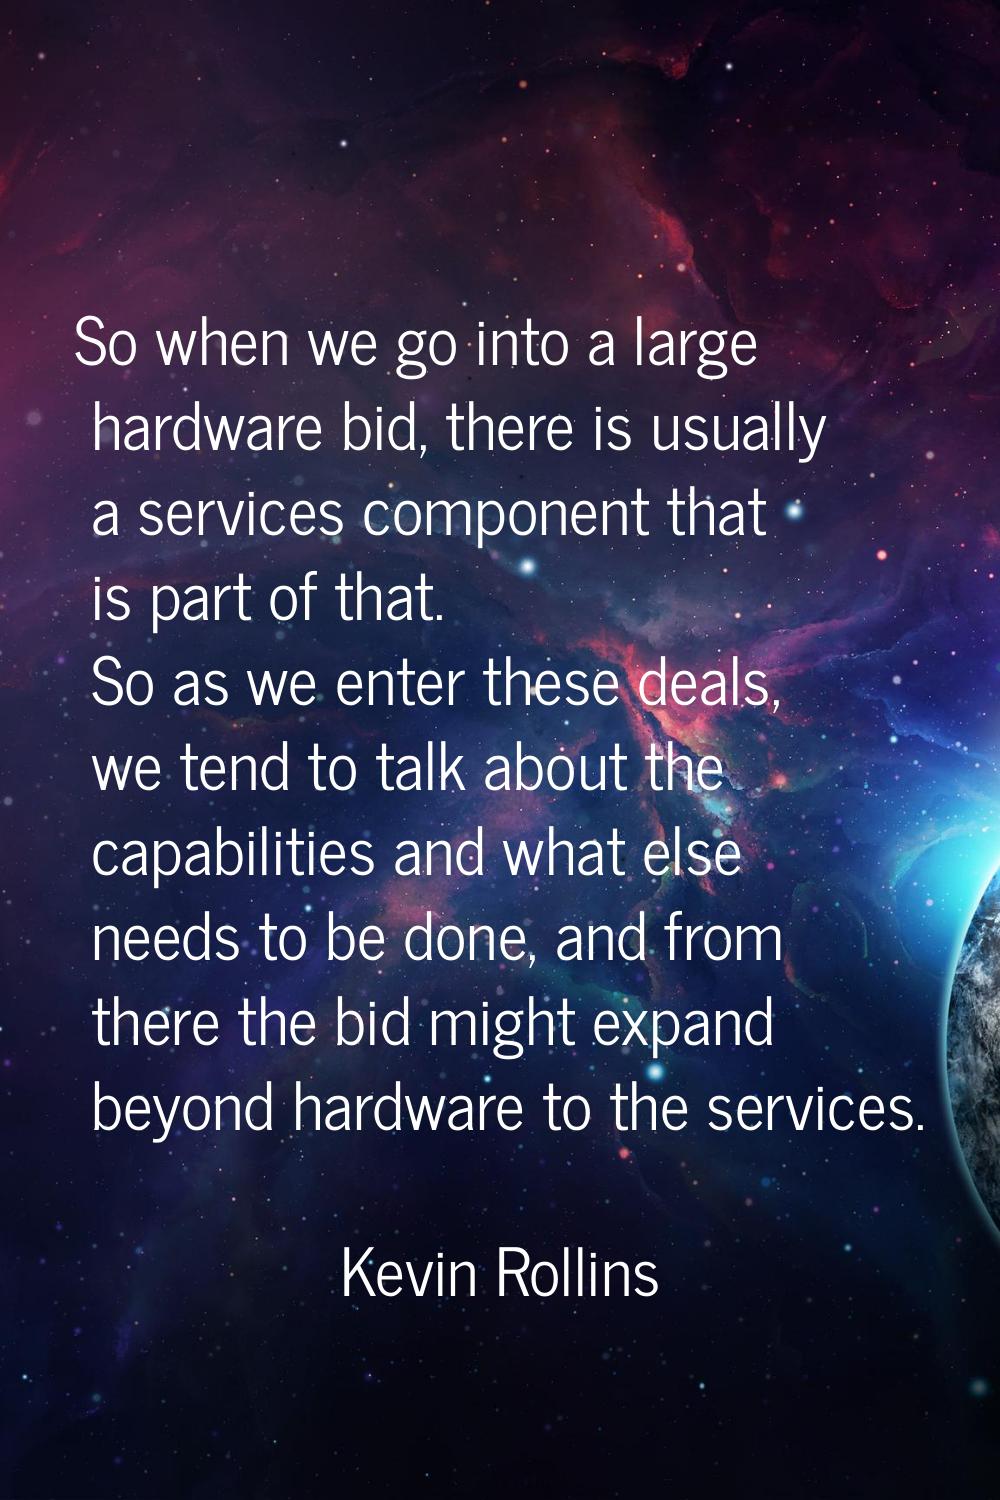 So when we go into a large hardware bid, there is usually a services component that is part of that